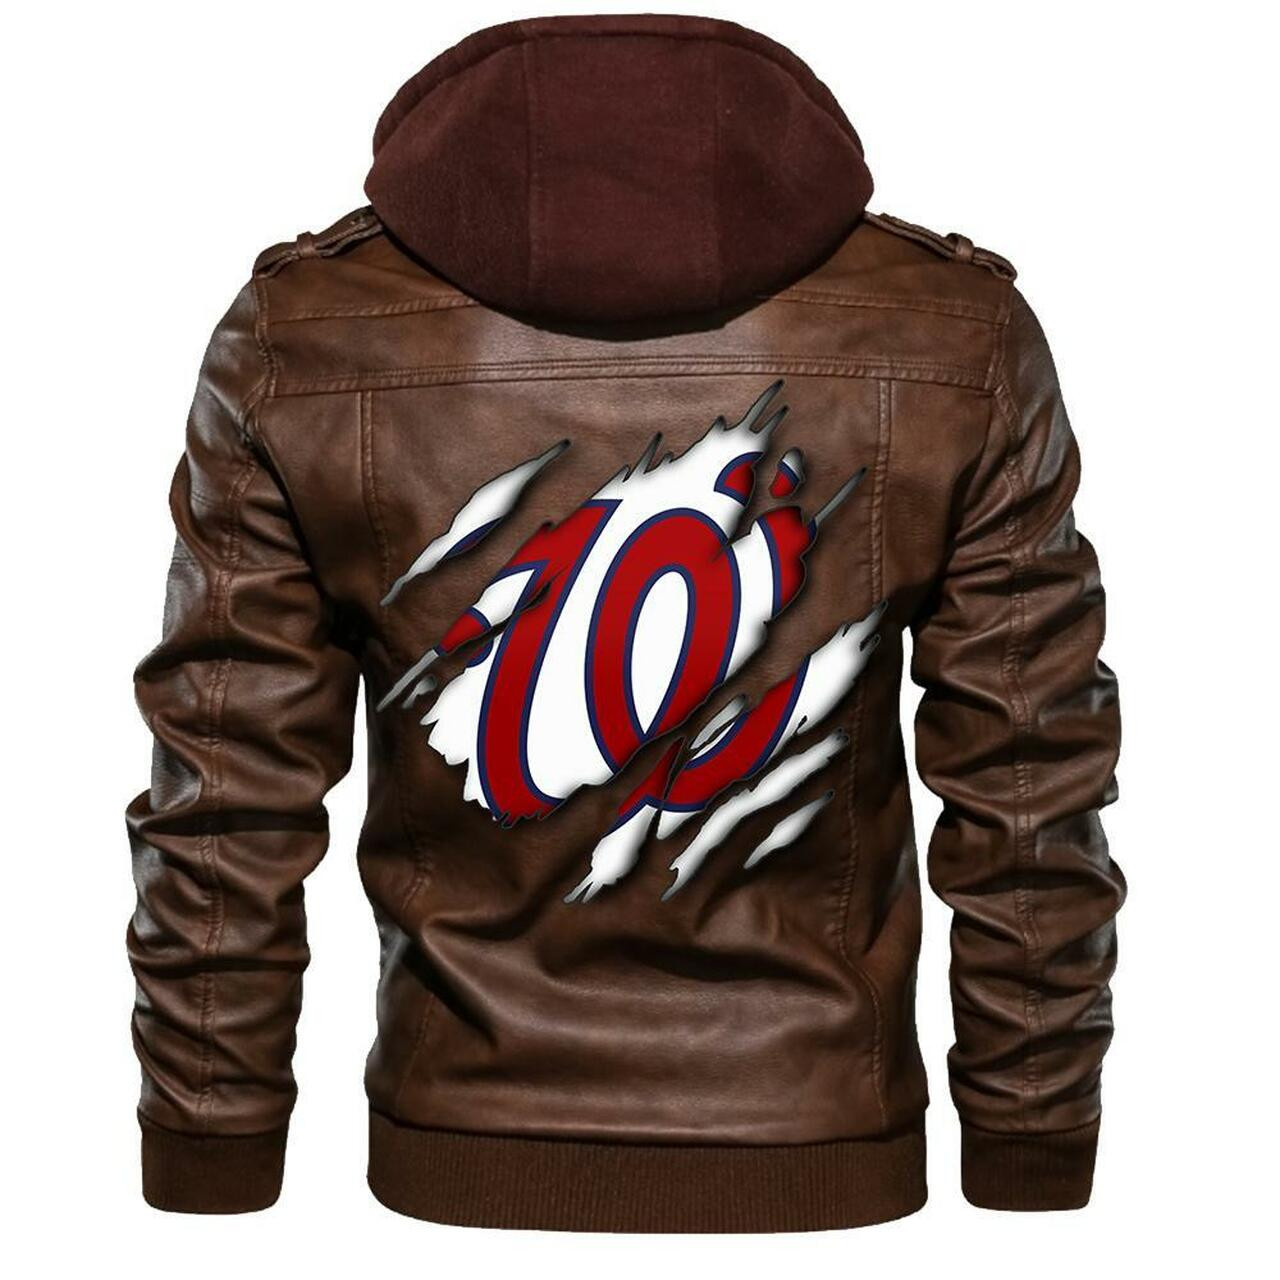 Are you looking for a great leather jacket? 219